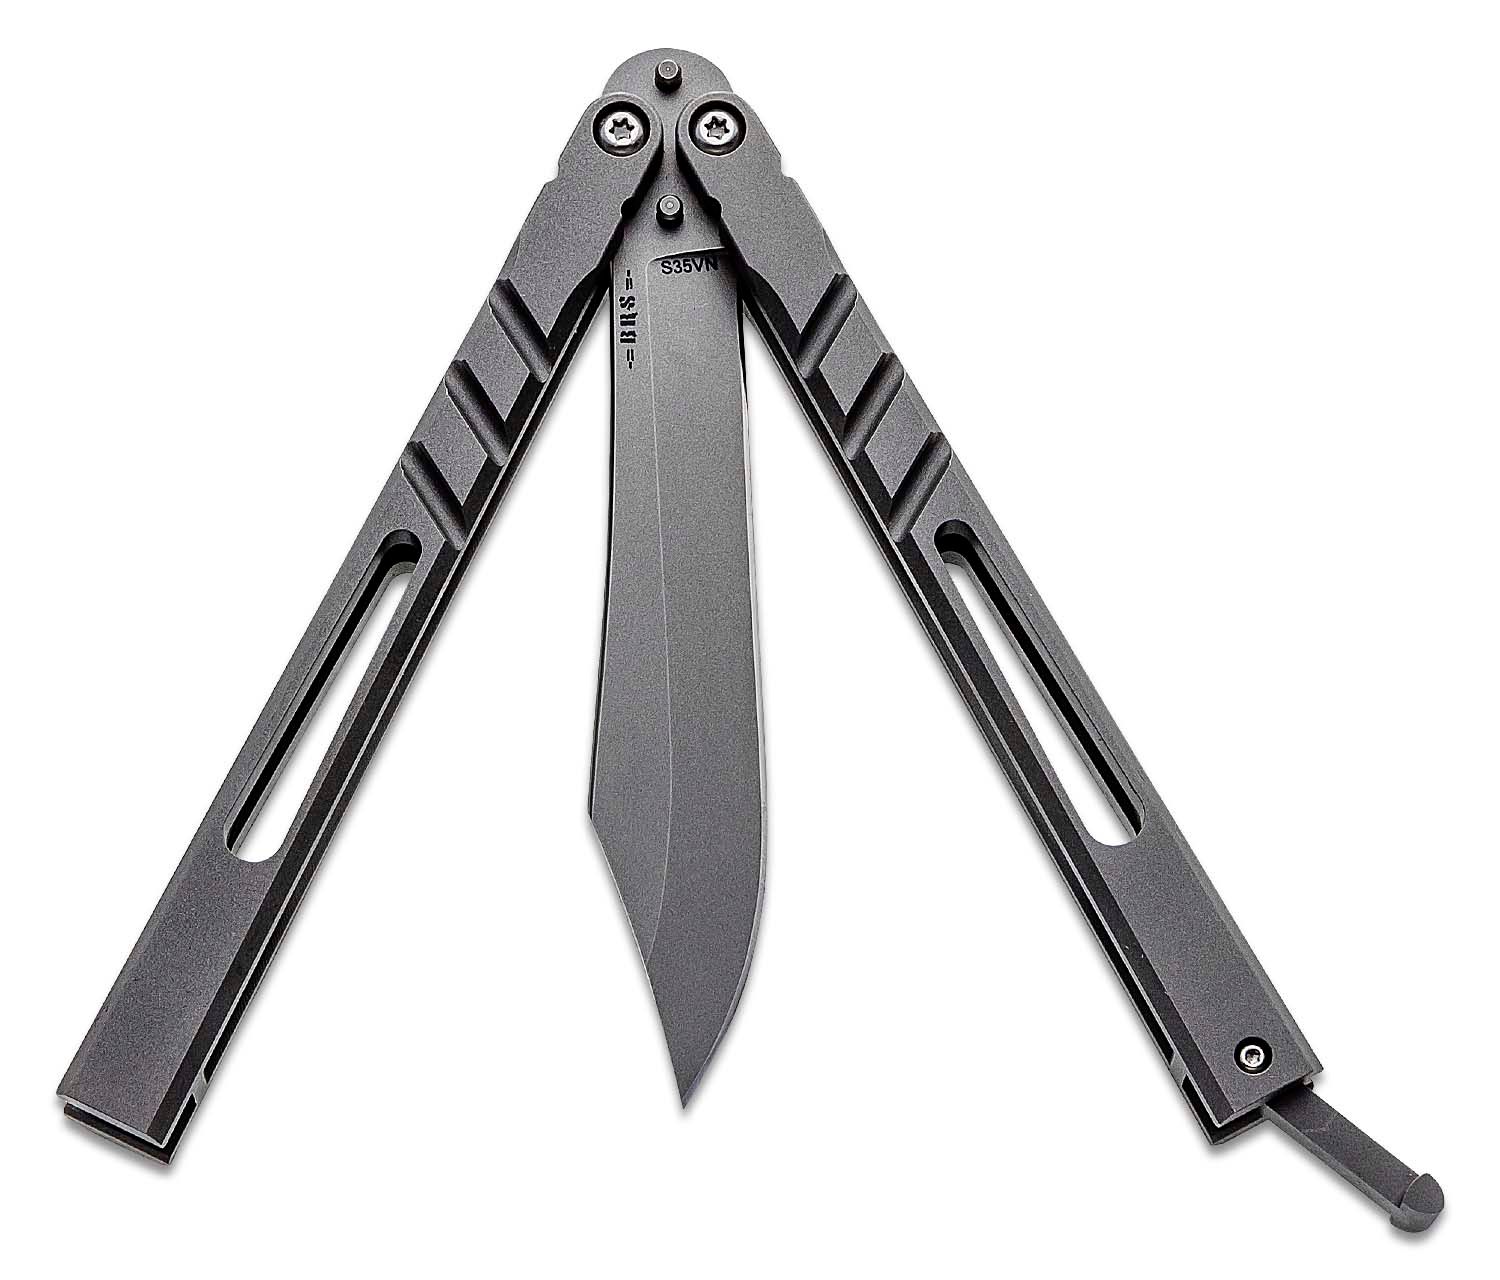 BRS Alpha Beast AB Sandwich Titanium Handle D2 Blade Butterfly Trainer  Knife Bushing System Free Swinging Pocket Knife From Kershaw, $84.94